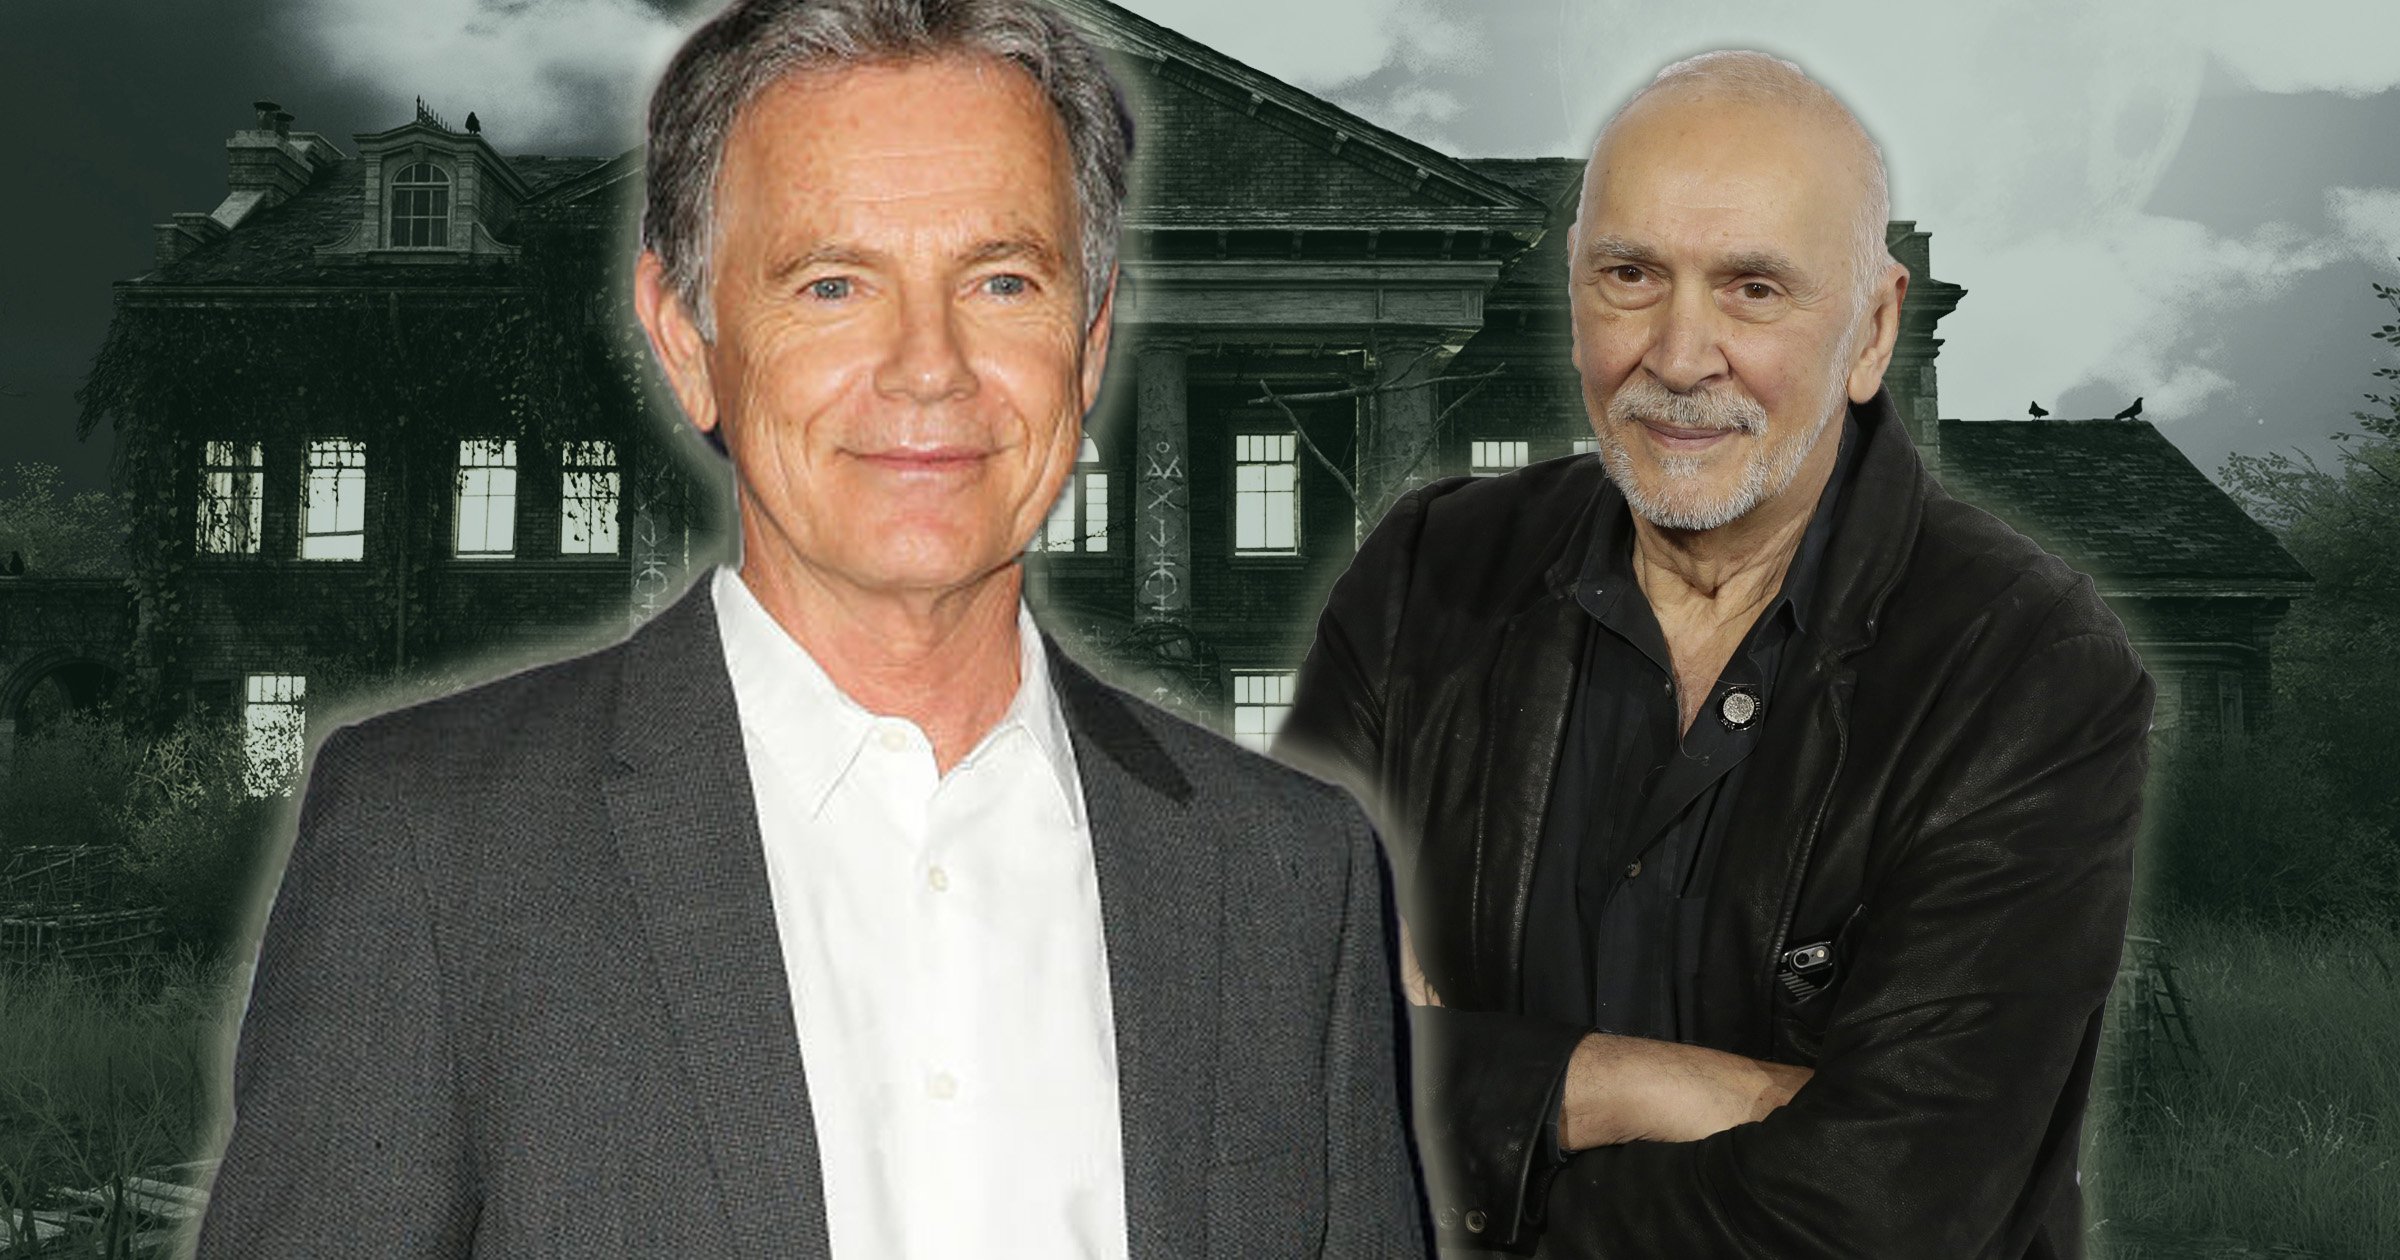 Frank Langella replaced by Bruce Greenwood in Netflix’s The Fall Of The House Of Usher following ‘sexual misconduct investigation’